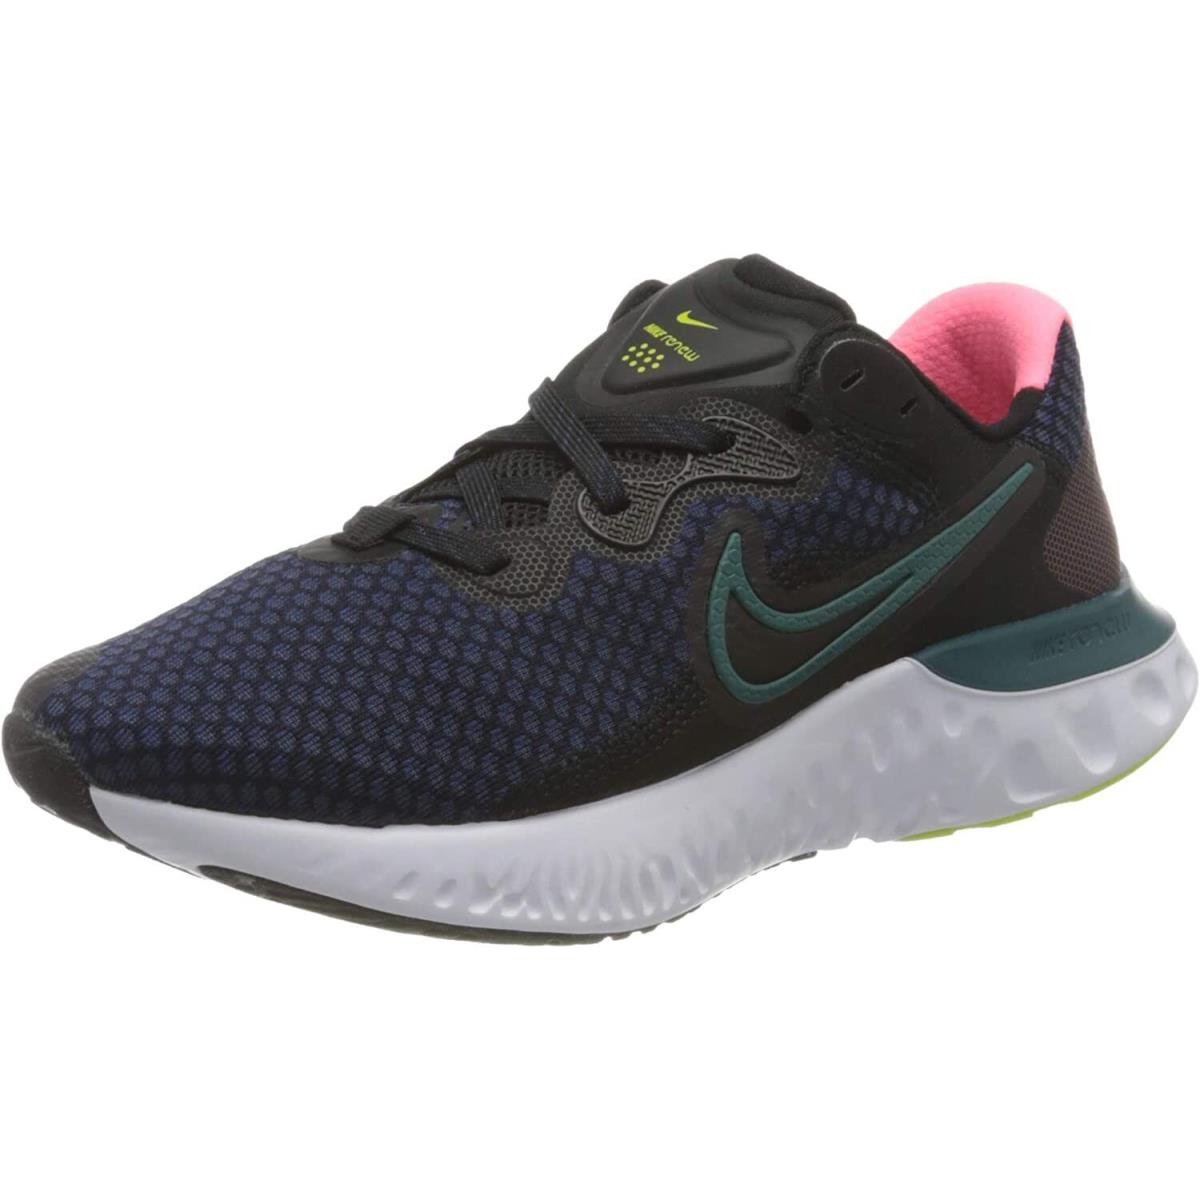 Wmns Nike Women`s Re Run 2 Running Shoes CU3505 004 Size 8 US with Box